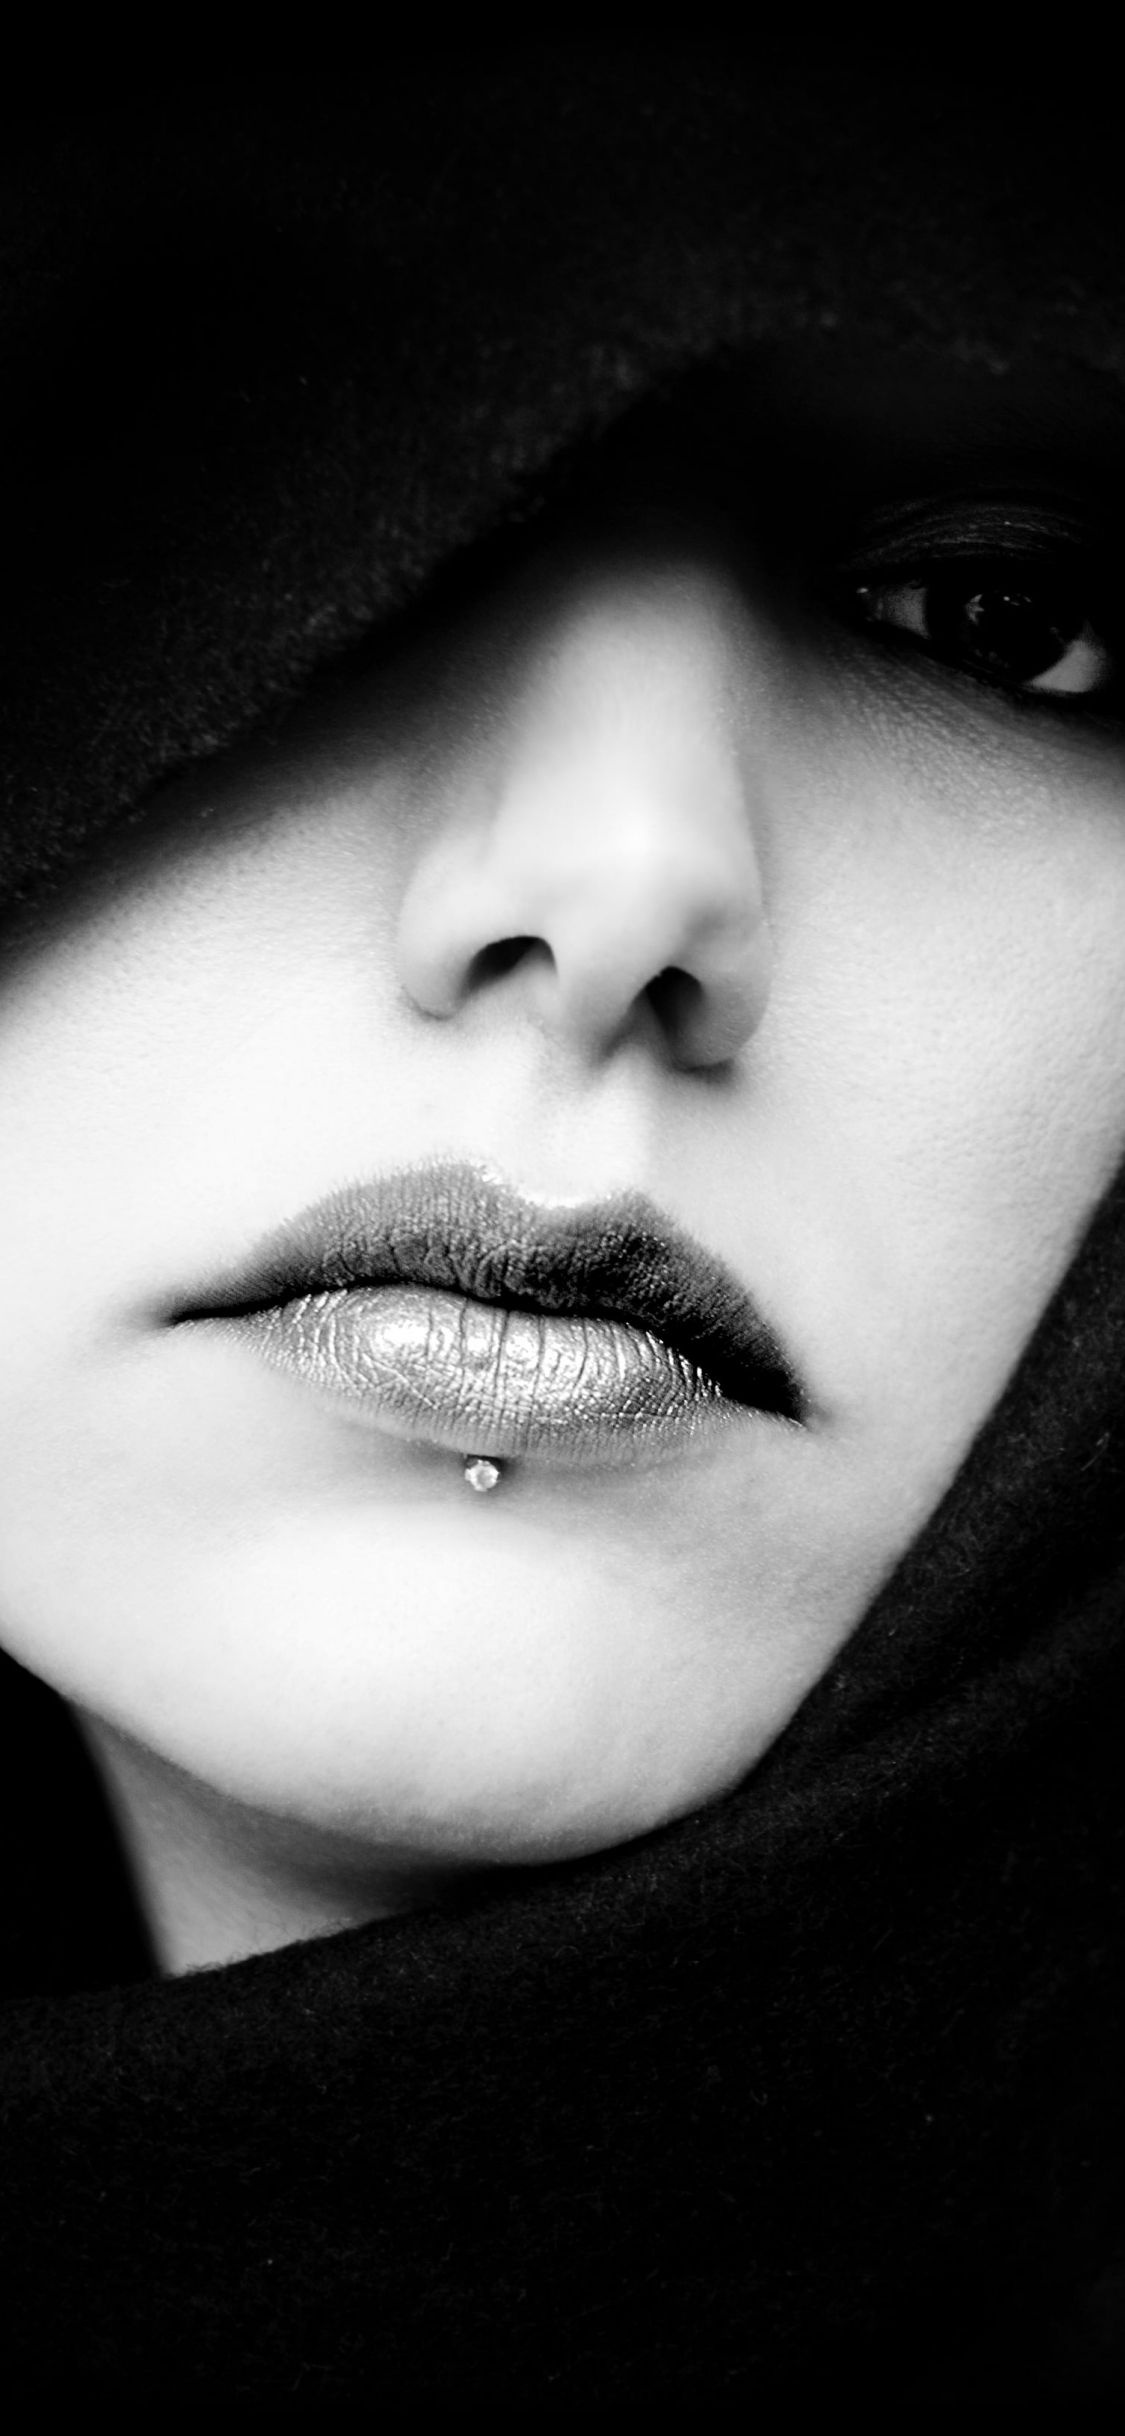 Piercing Wallpapers - Top Free Piercing Backgrounds 1130x2440